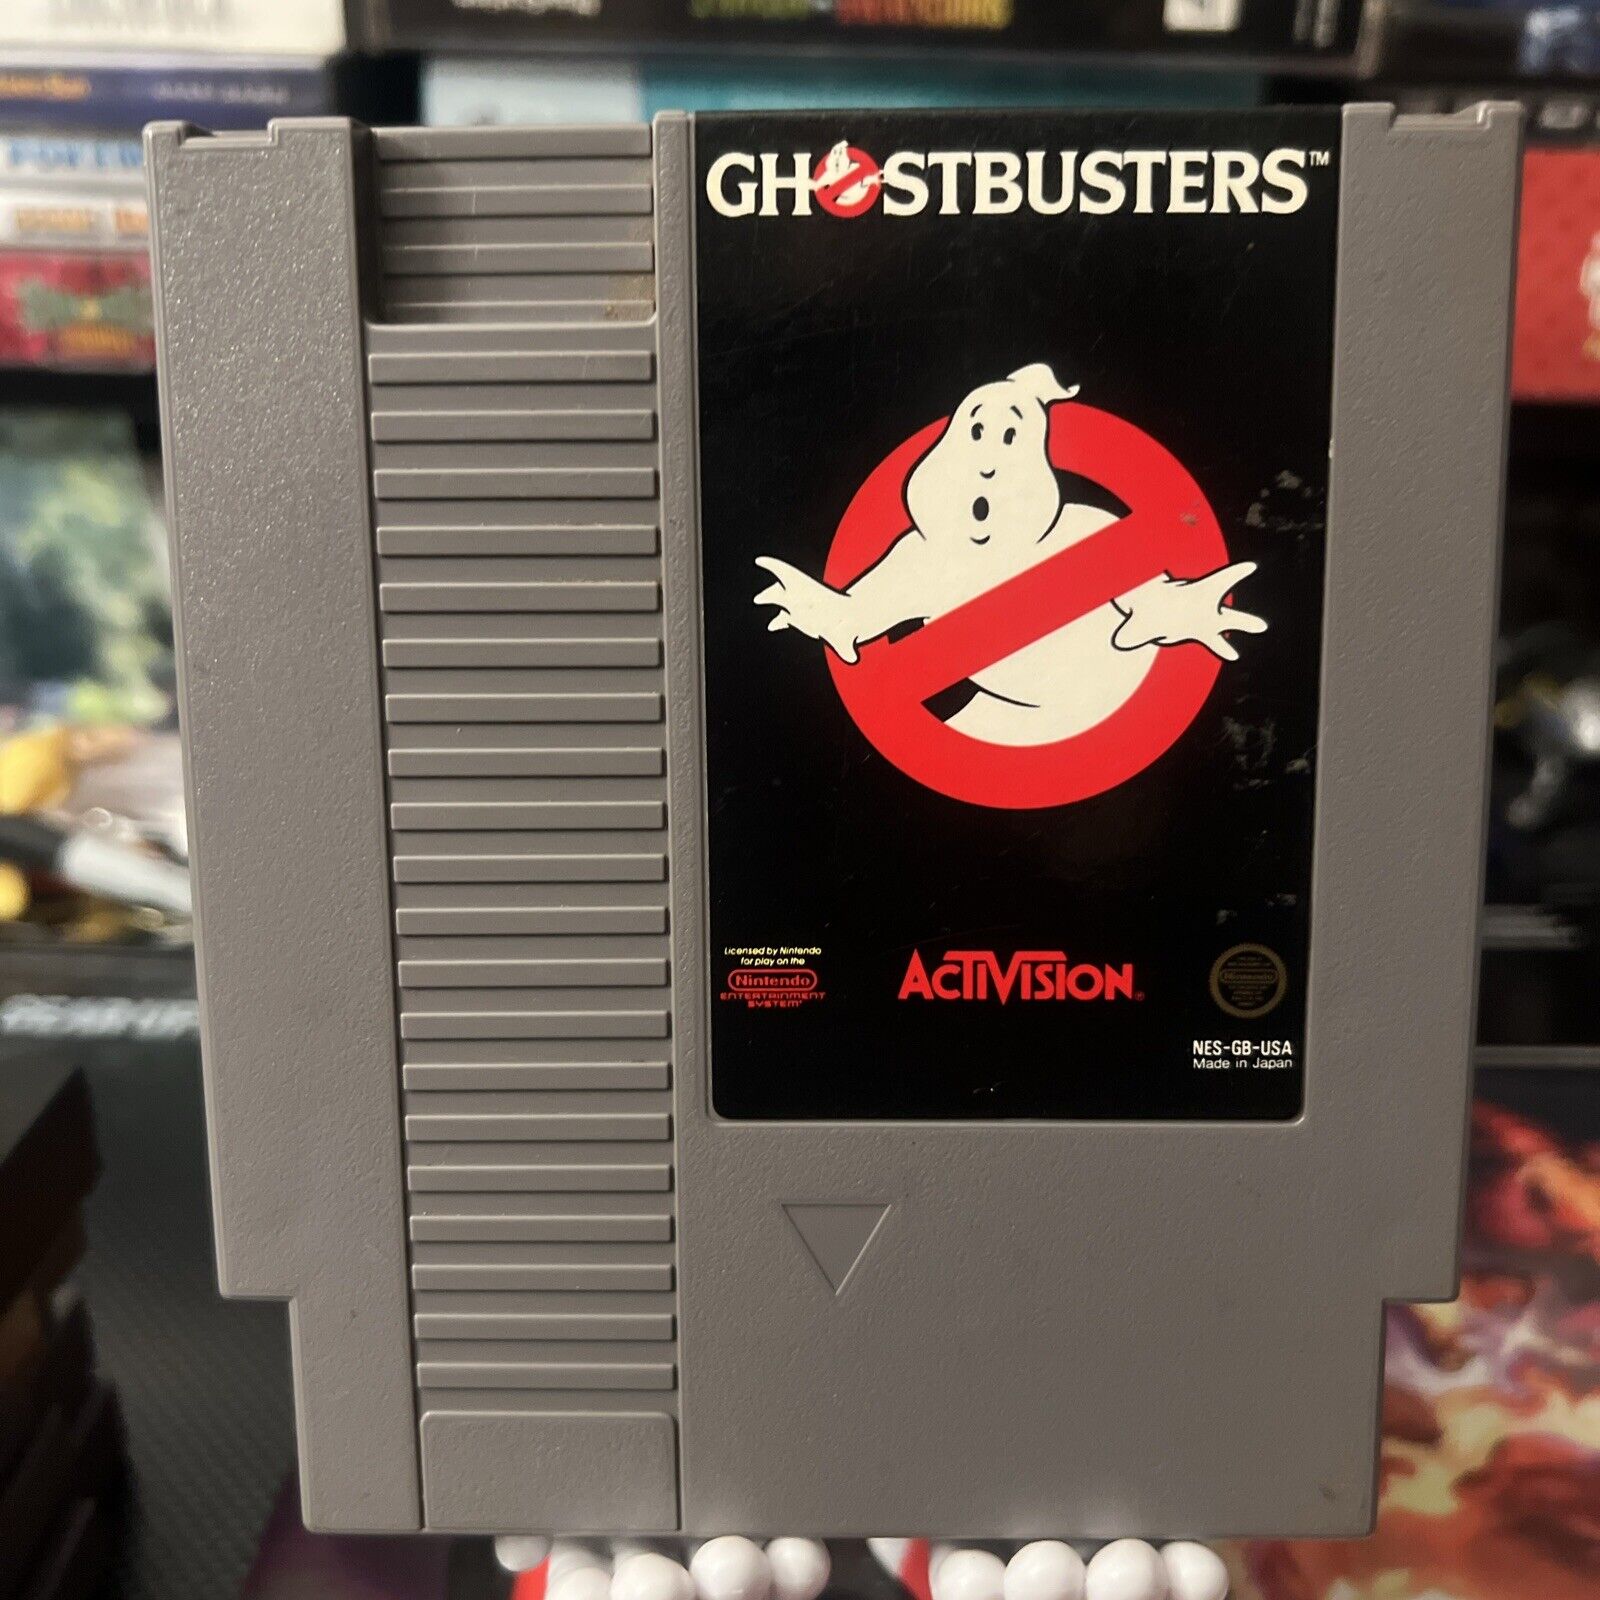 Ghostbusters (Nintendo Entertainment System, 1988)